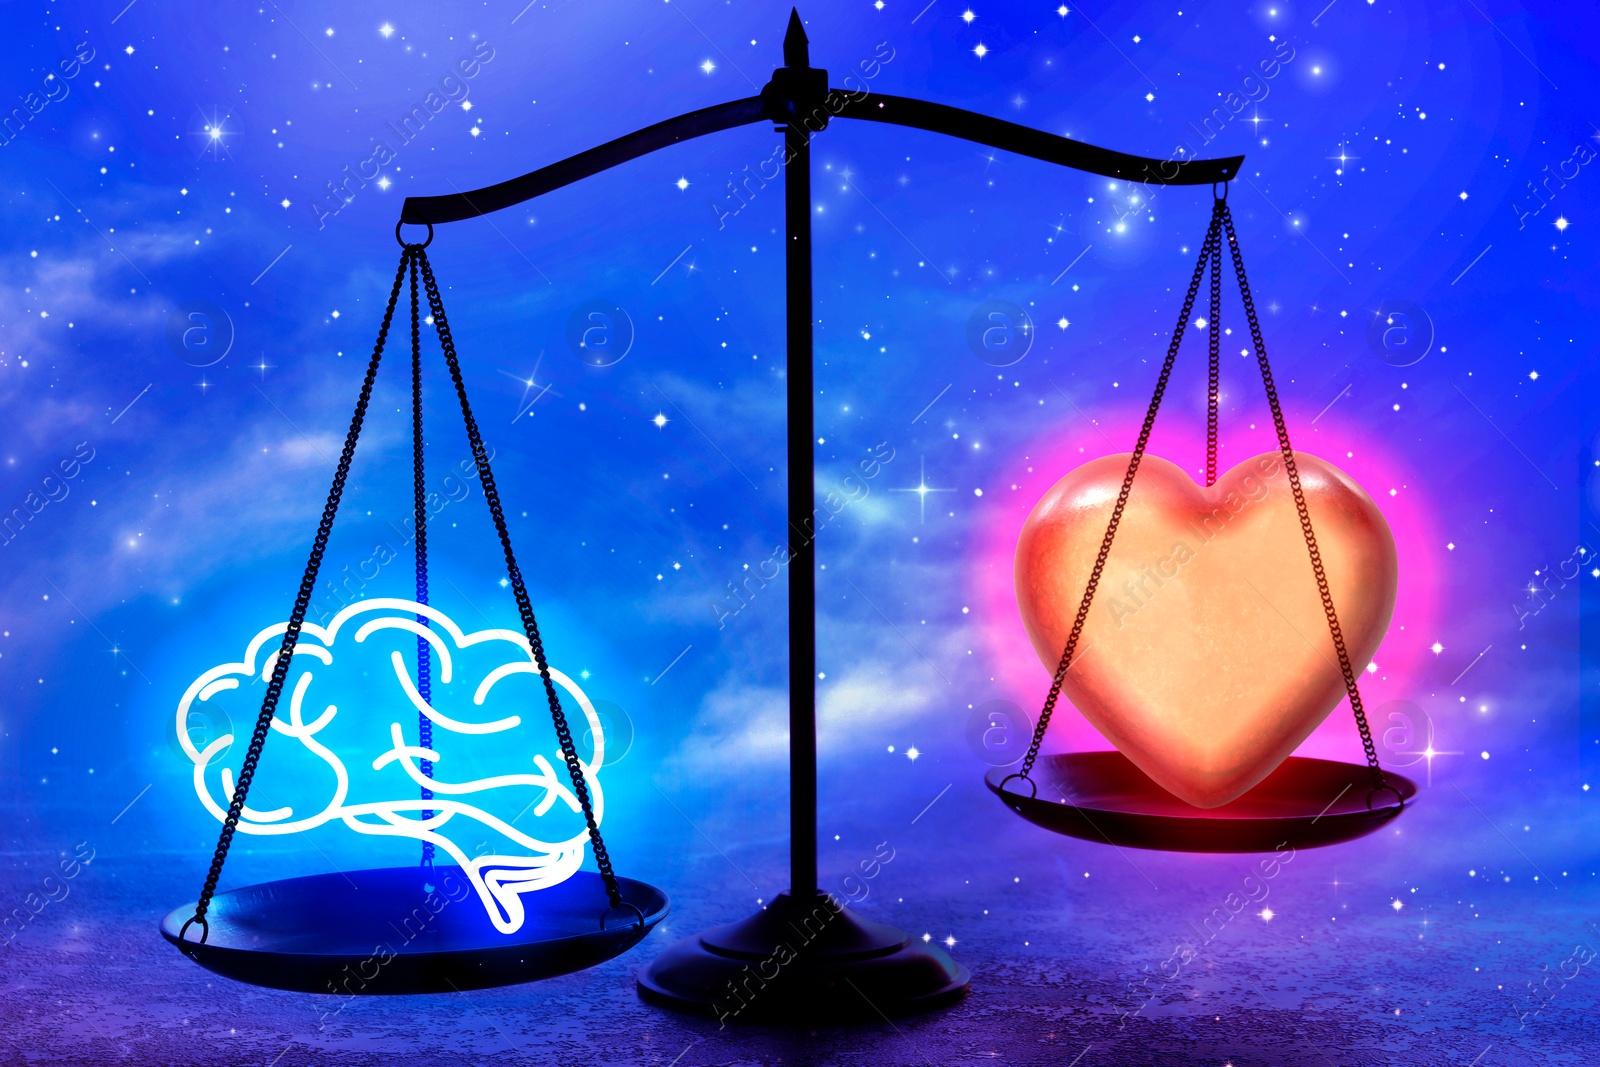 Image of Choosing between logic and emotions. Scales with glowing heart and illustration of brain against starry sky